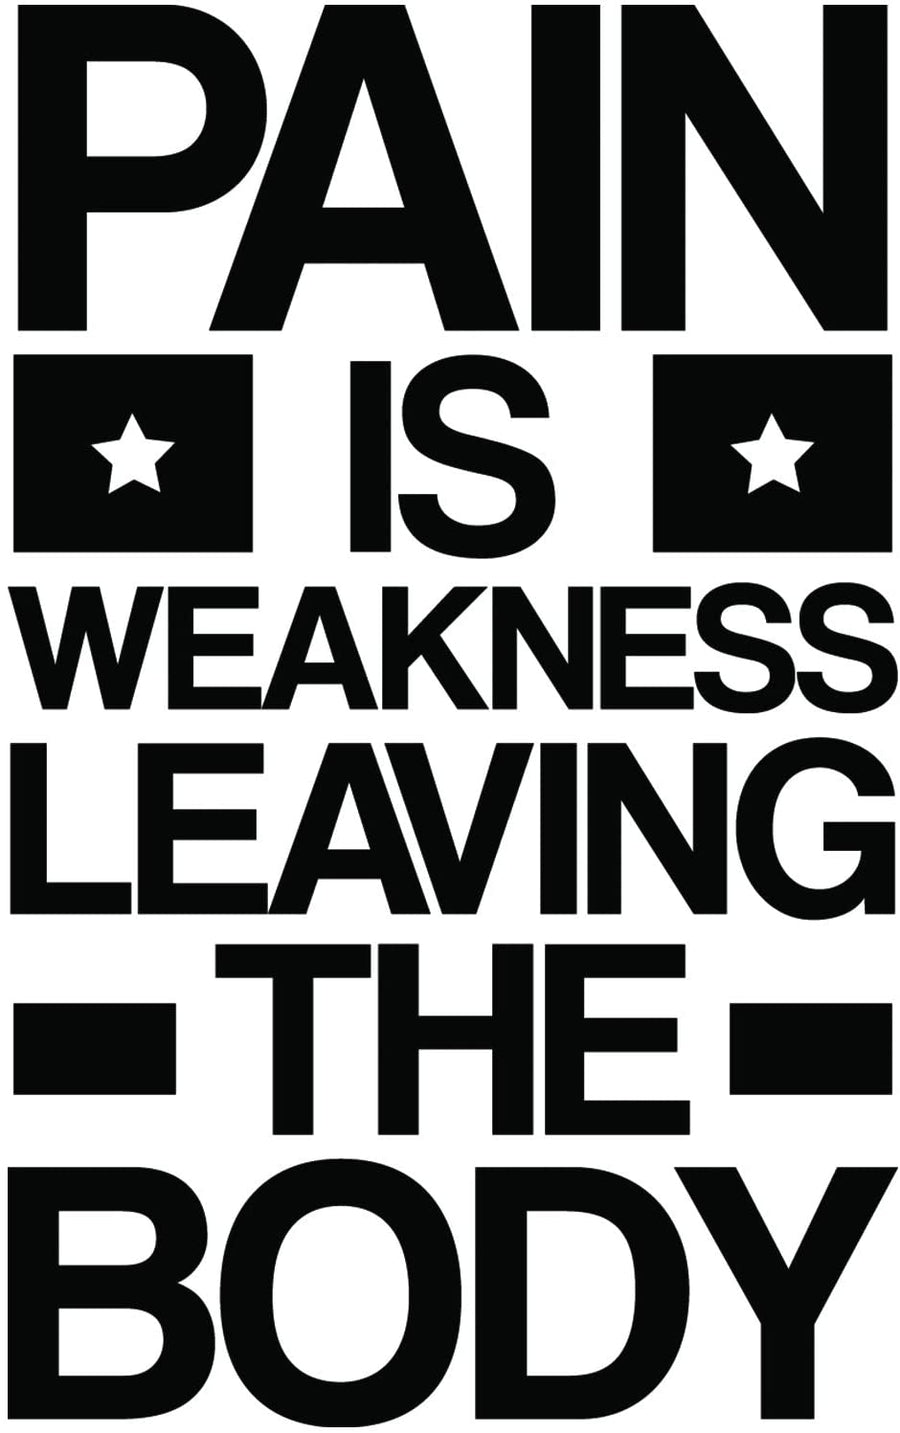 Pain is Weakness Leaving The Body Wall Decal Sticker